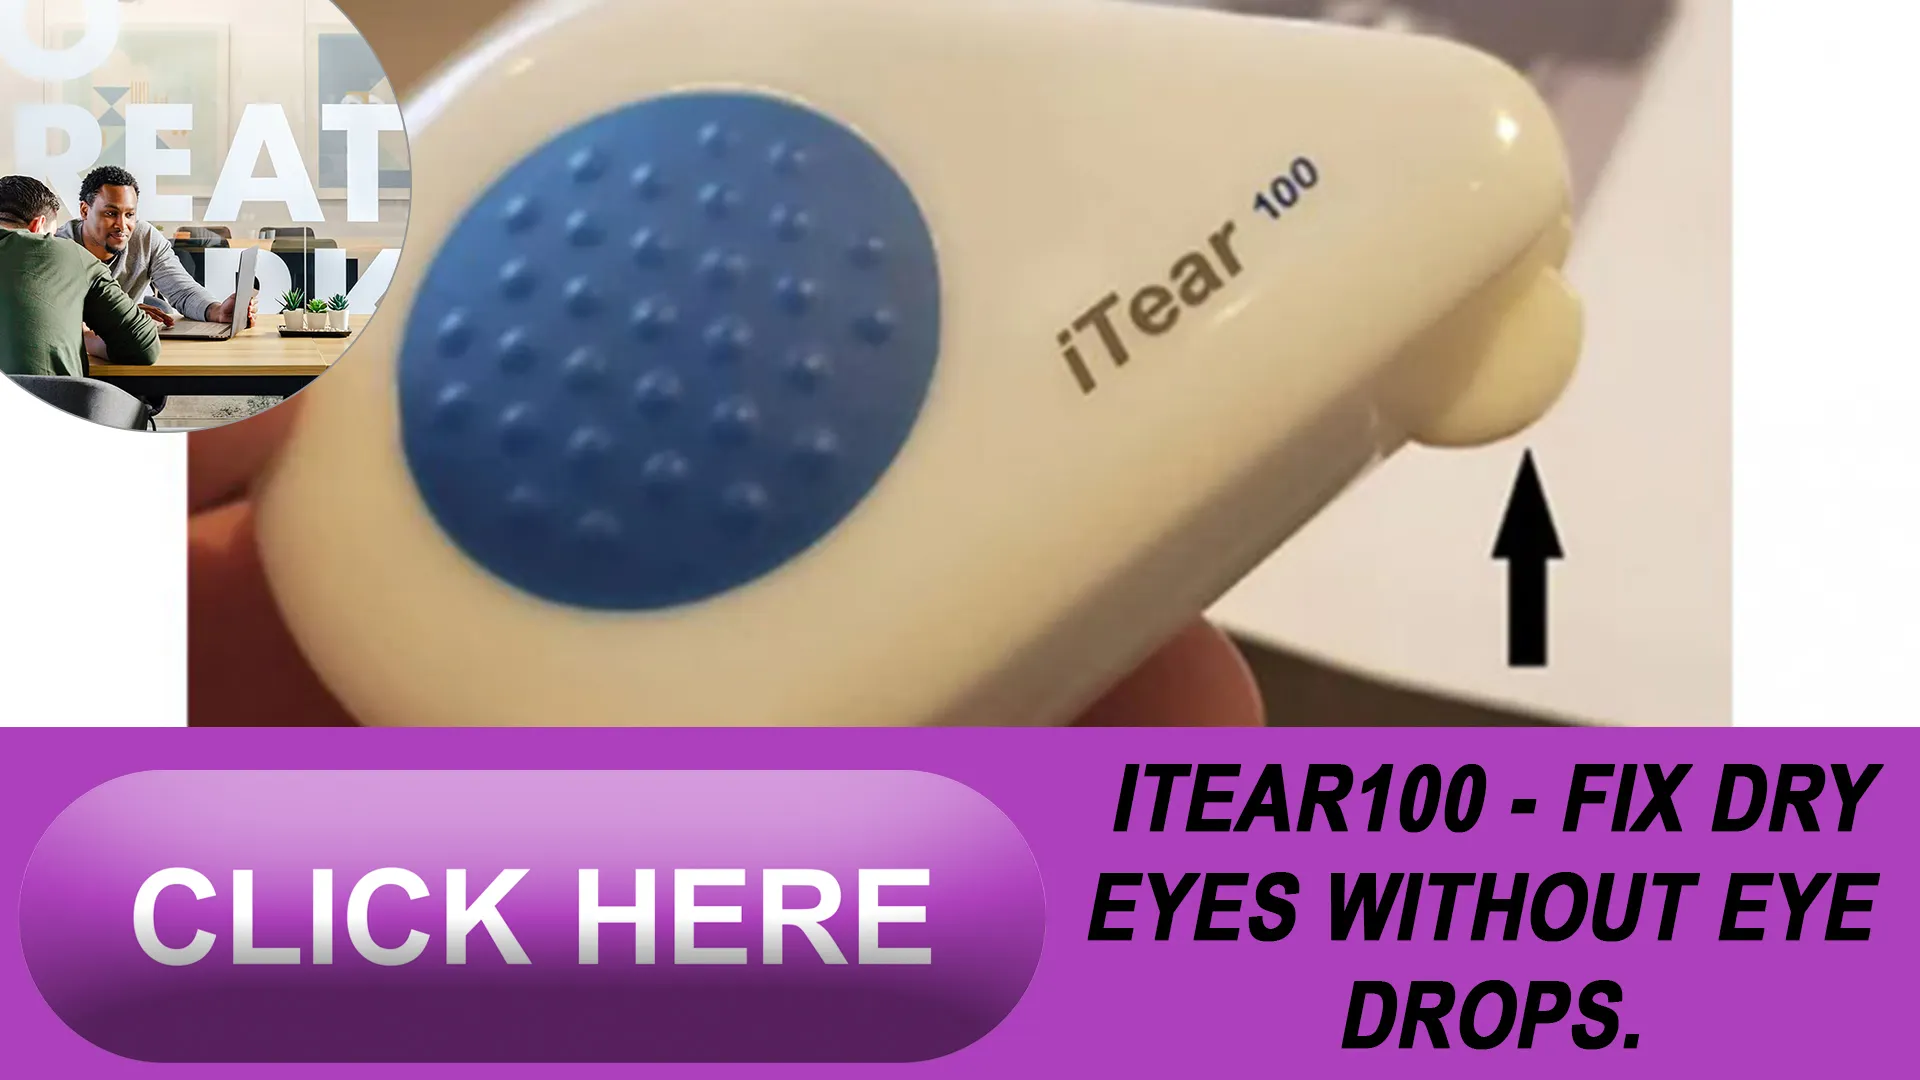 Turn the Tide Against Dry Eyes: Natural Relief is Here